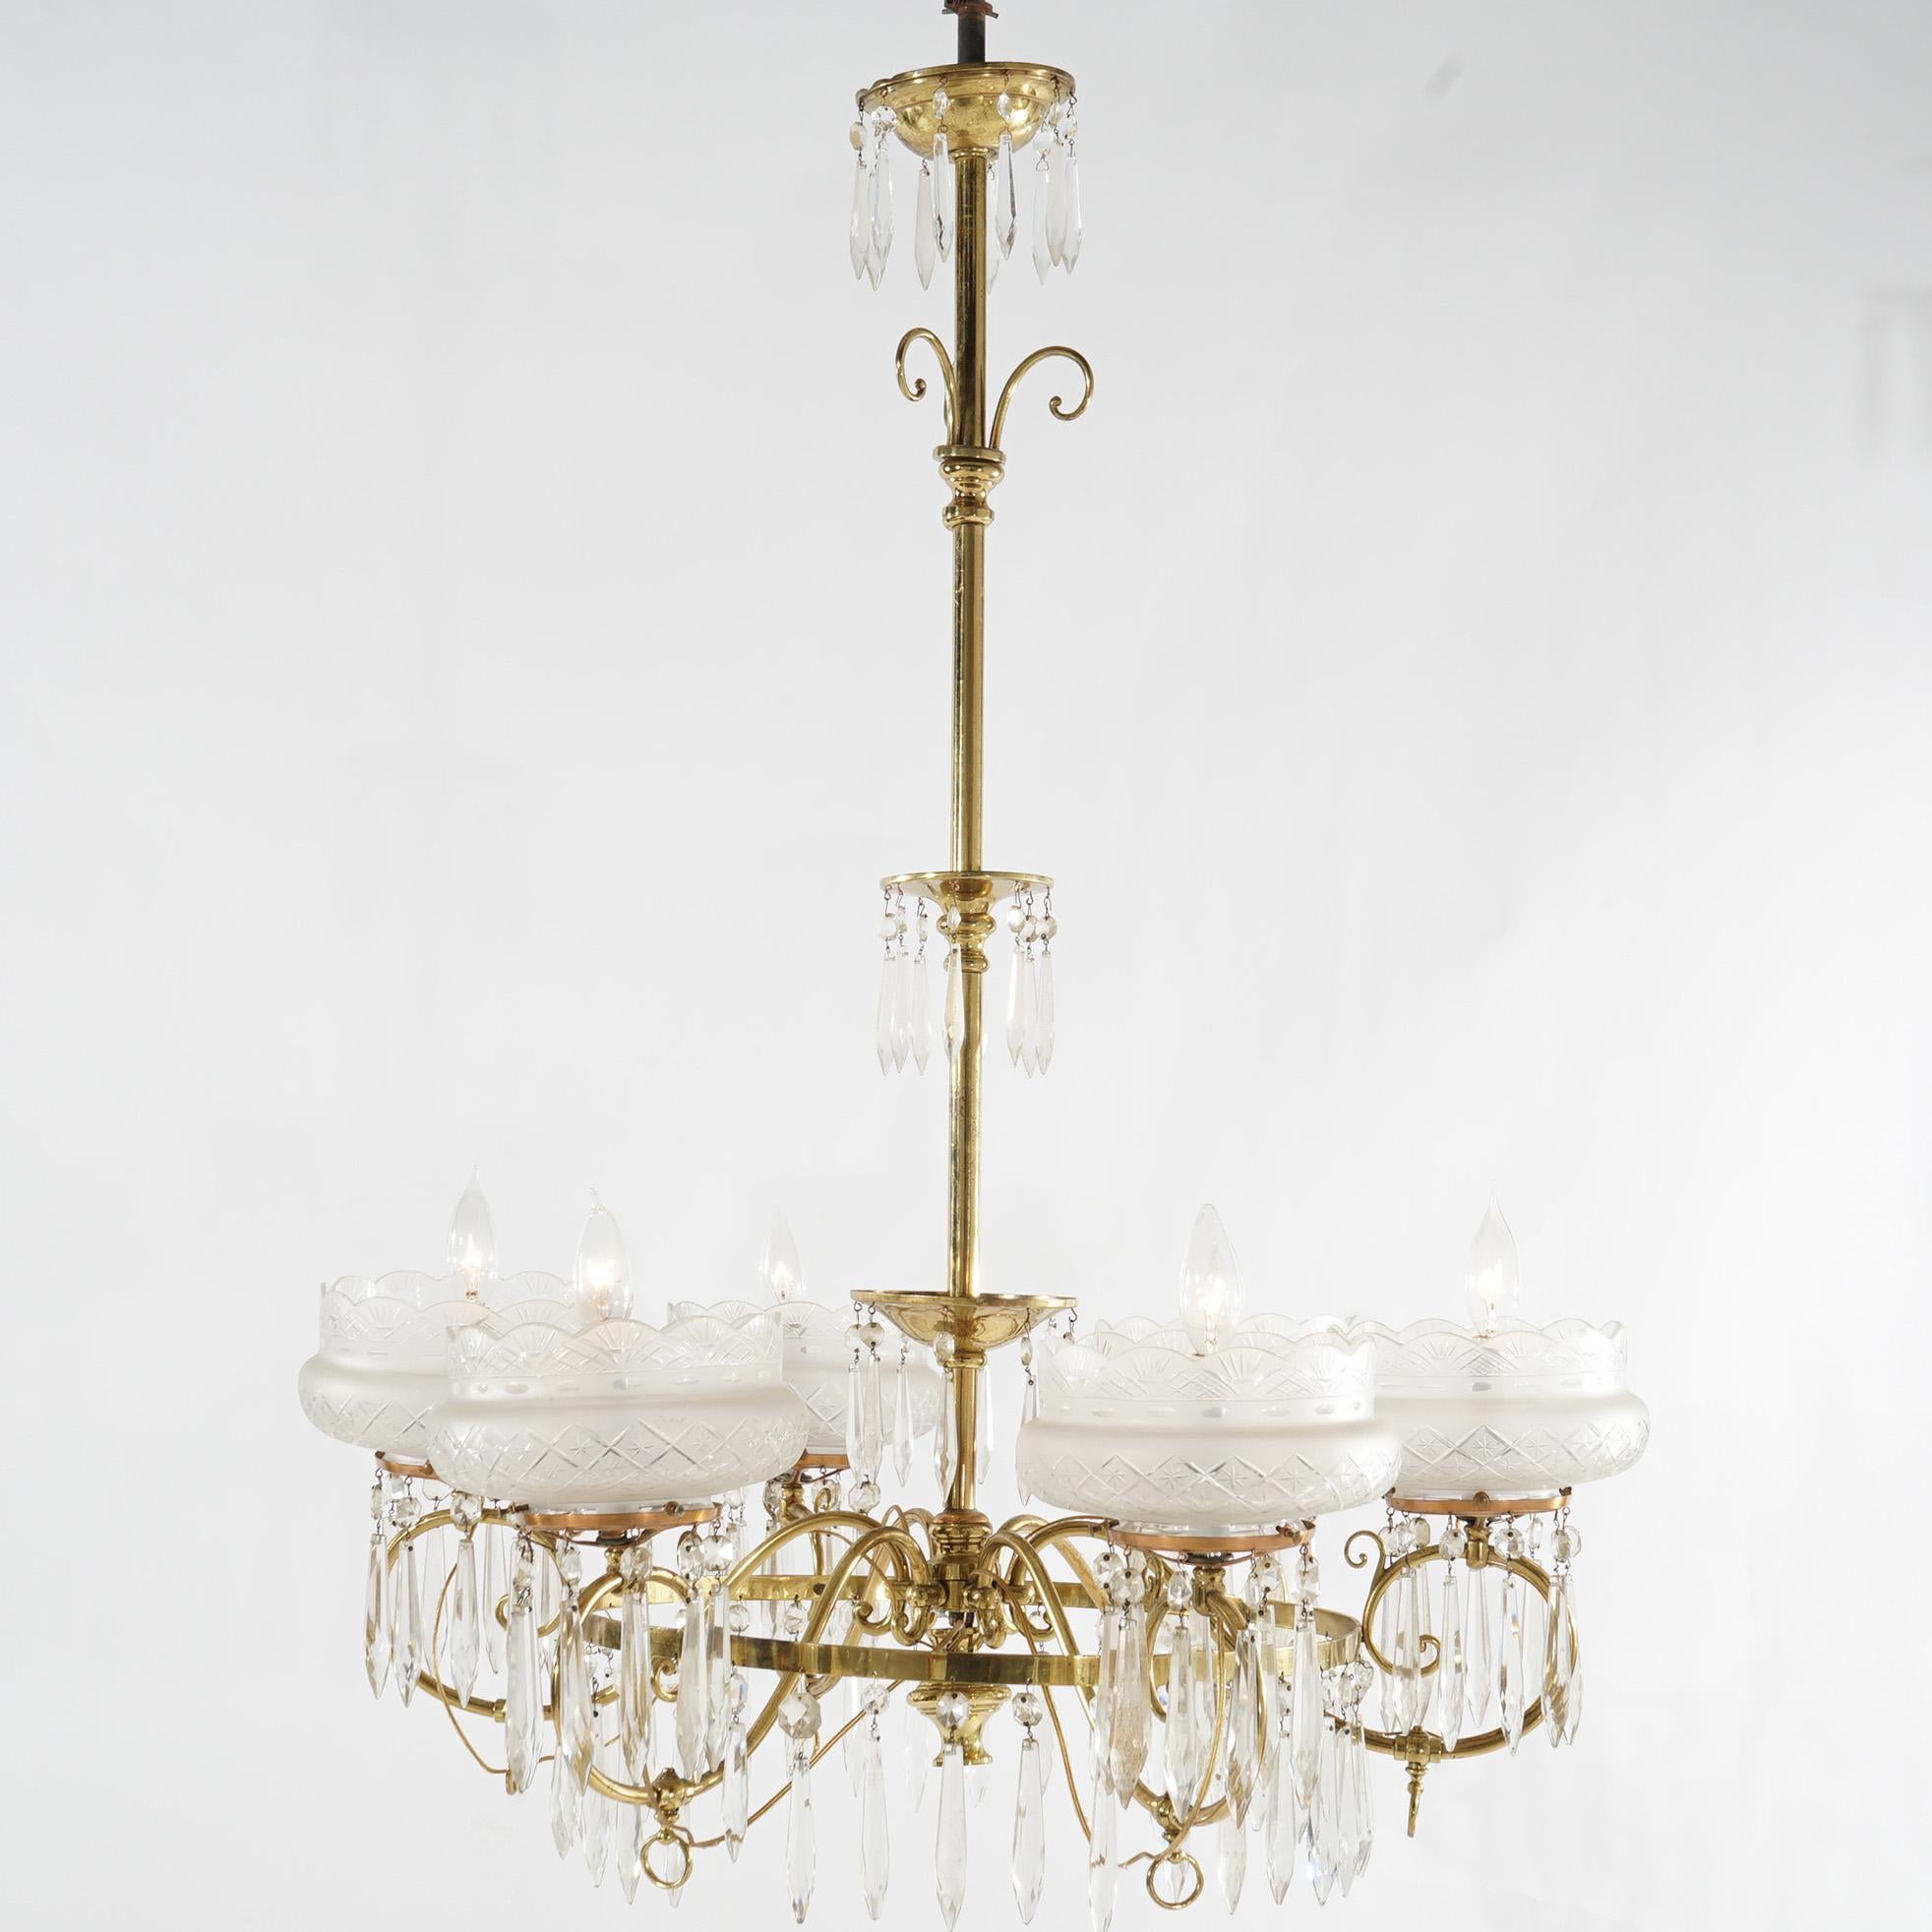 20th Century Large Antique Aesthetic Brass Gas Chandelier With Cut Glass Shades & Crystals